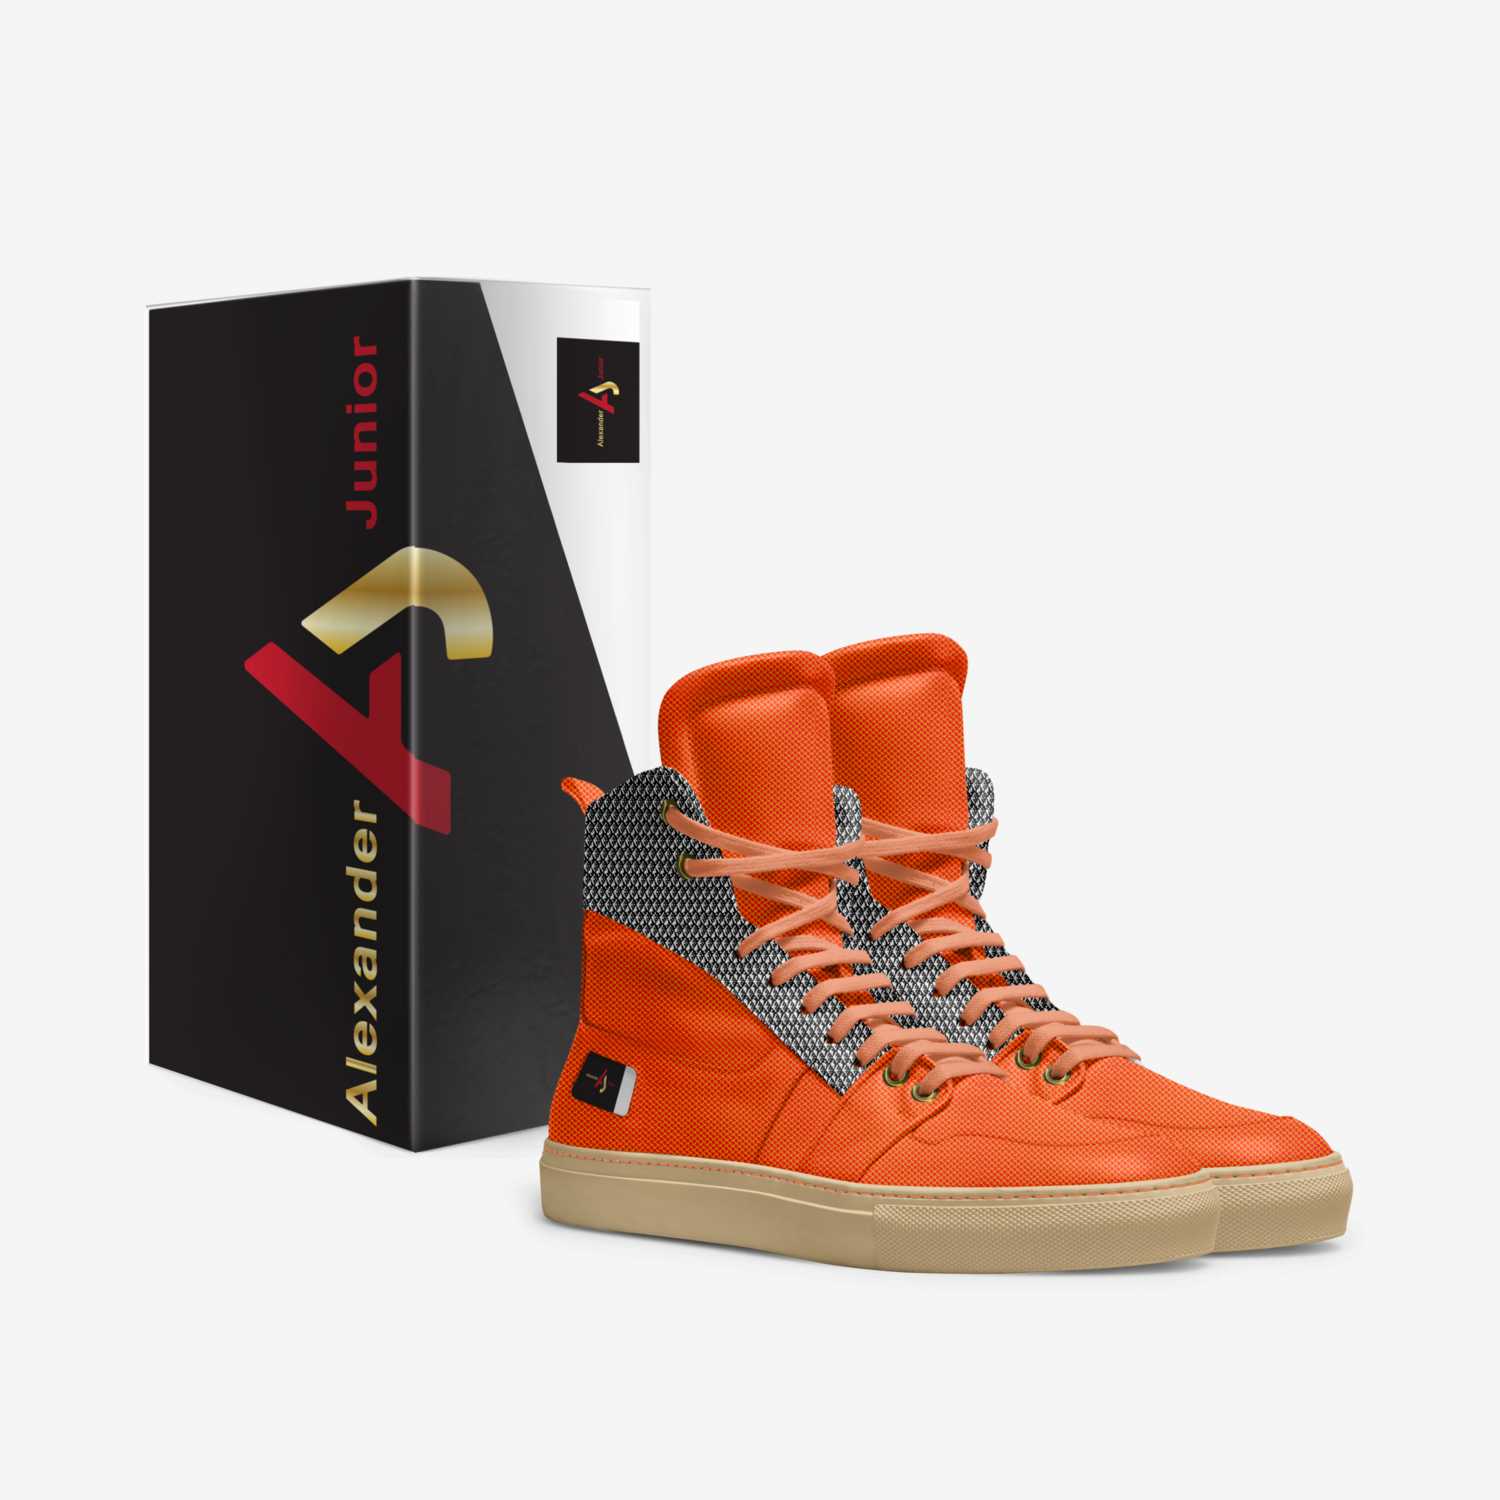 Alexander Junior custom made in Italy shoes by Alexander Woode | Box view